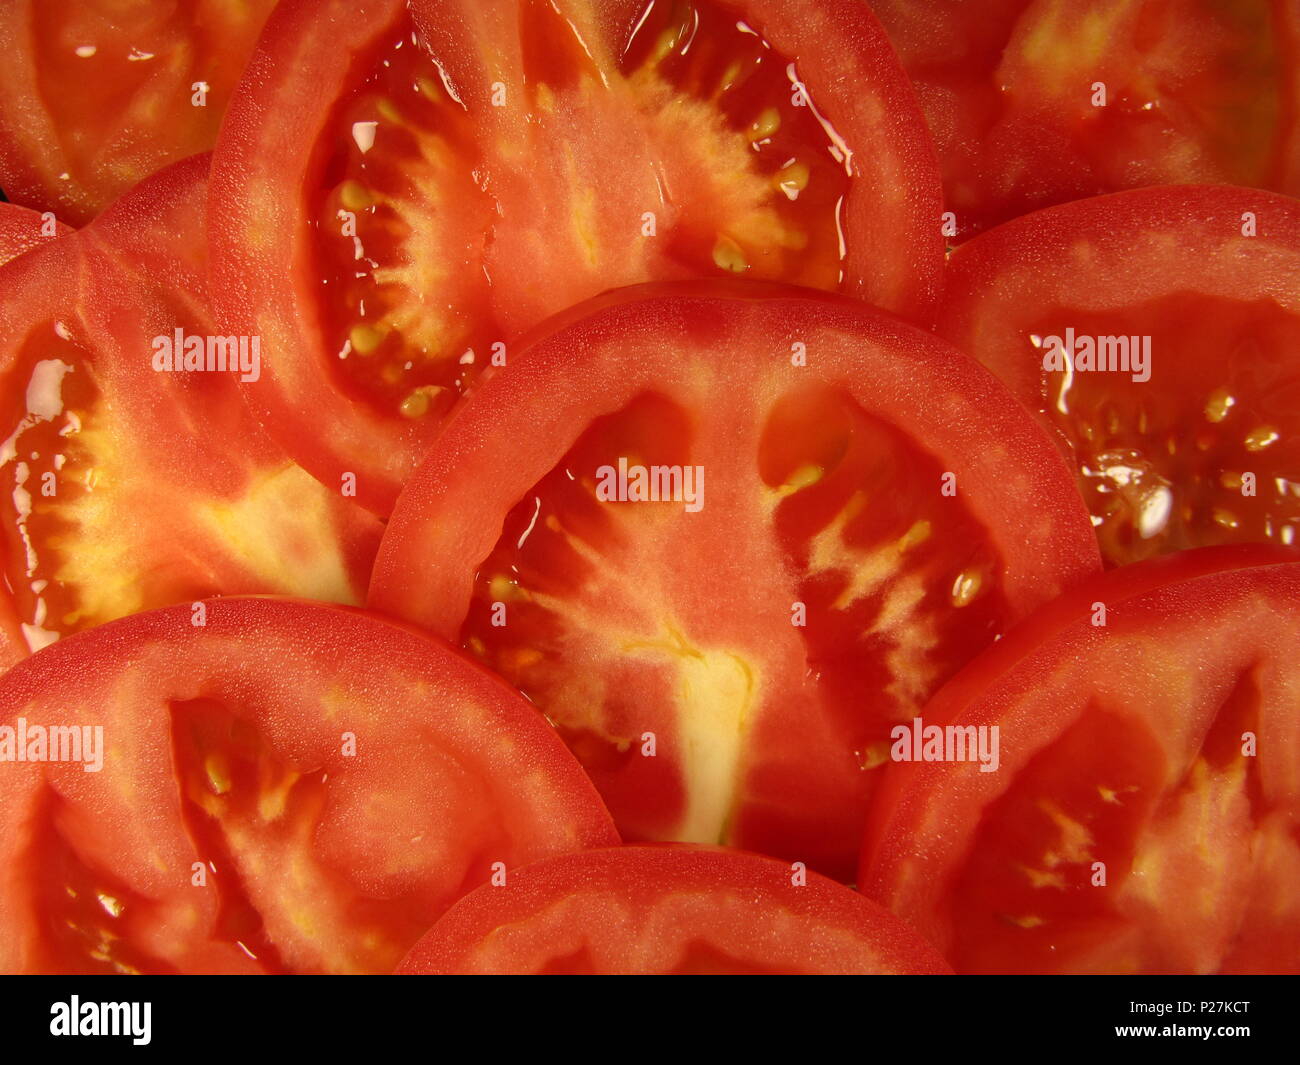 Red tomato texture or  background Stock Photo